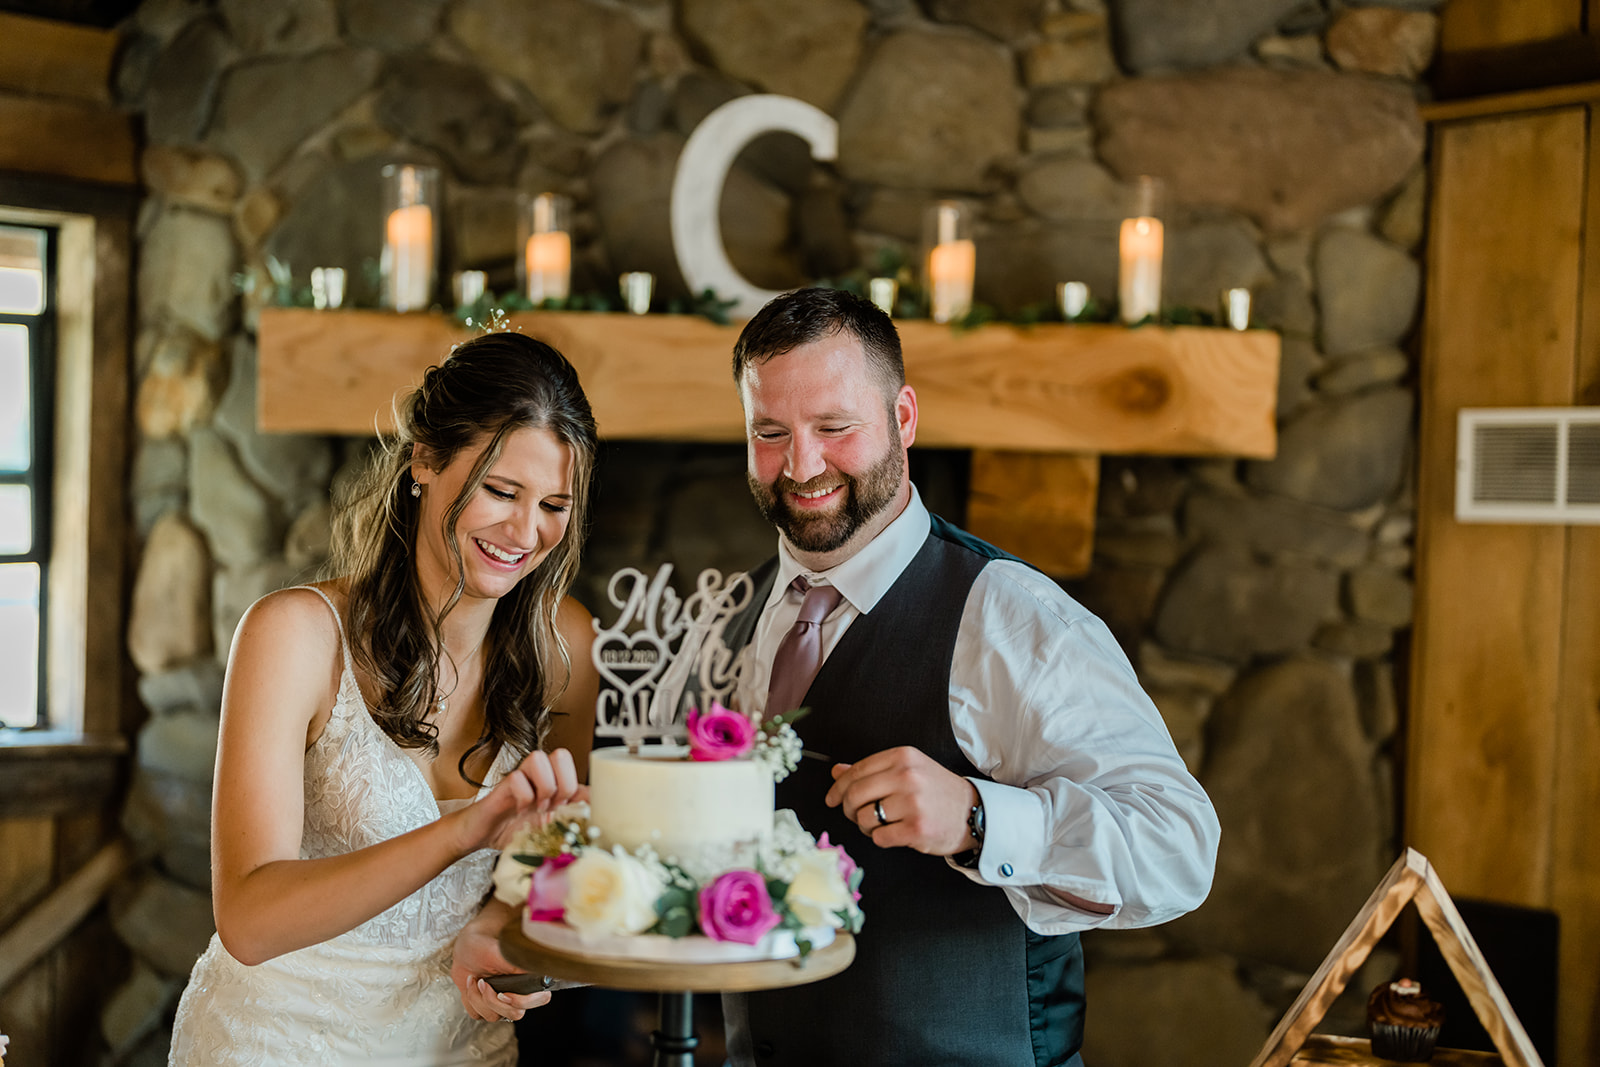 Bride and Groom cutting the cake at a Cattle Barn Wedding